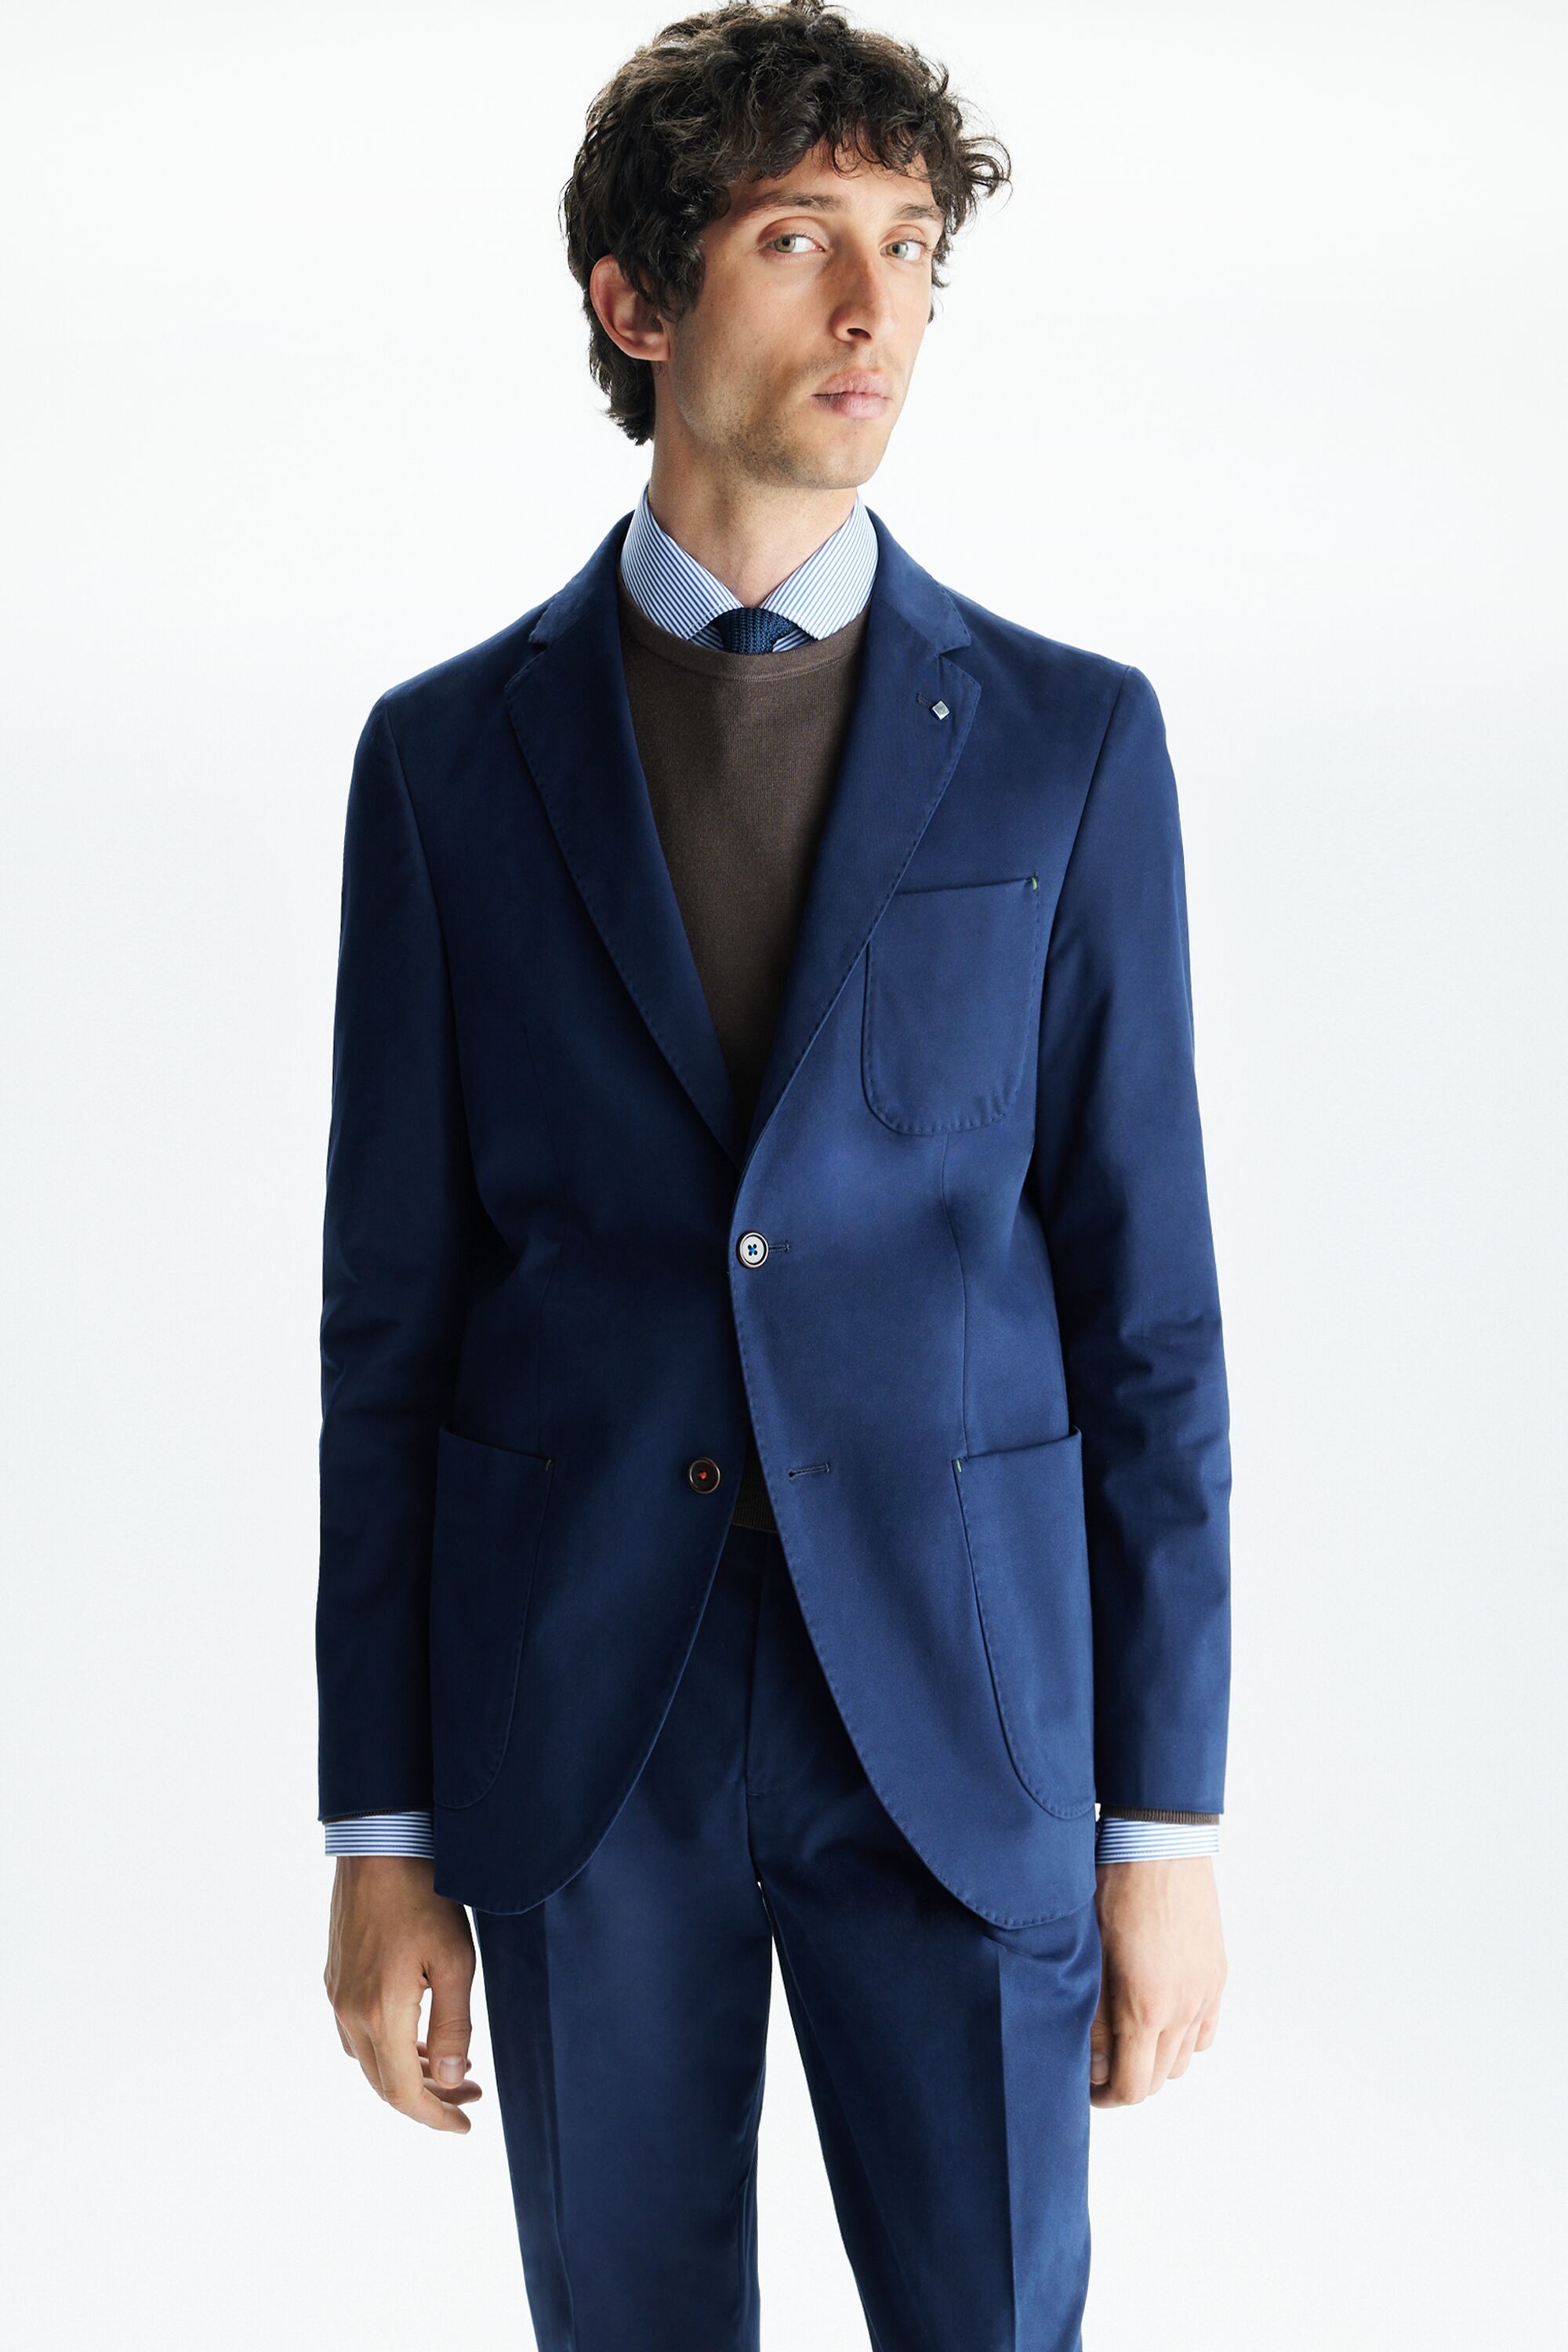 Twill relaxed fit suit jacket navy - Purificacion Garcia United Kingdom